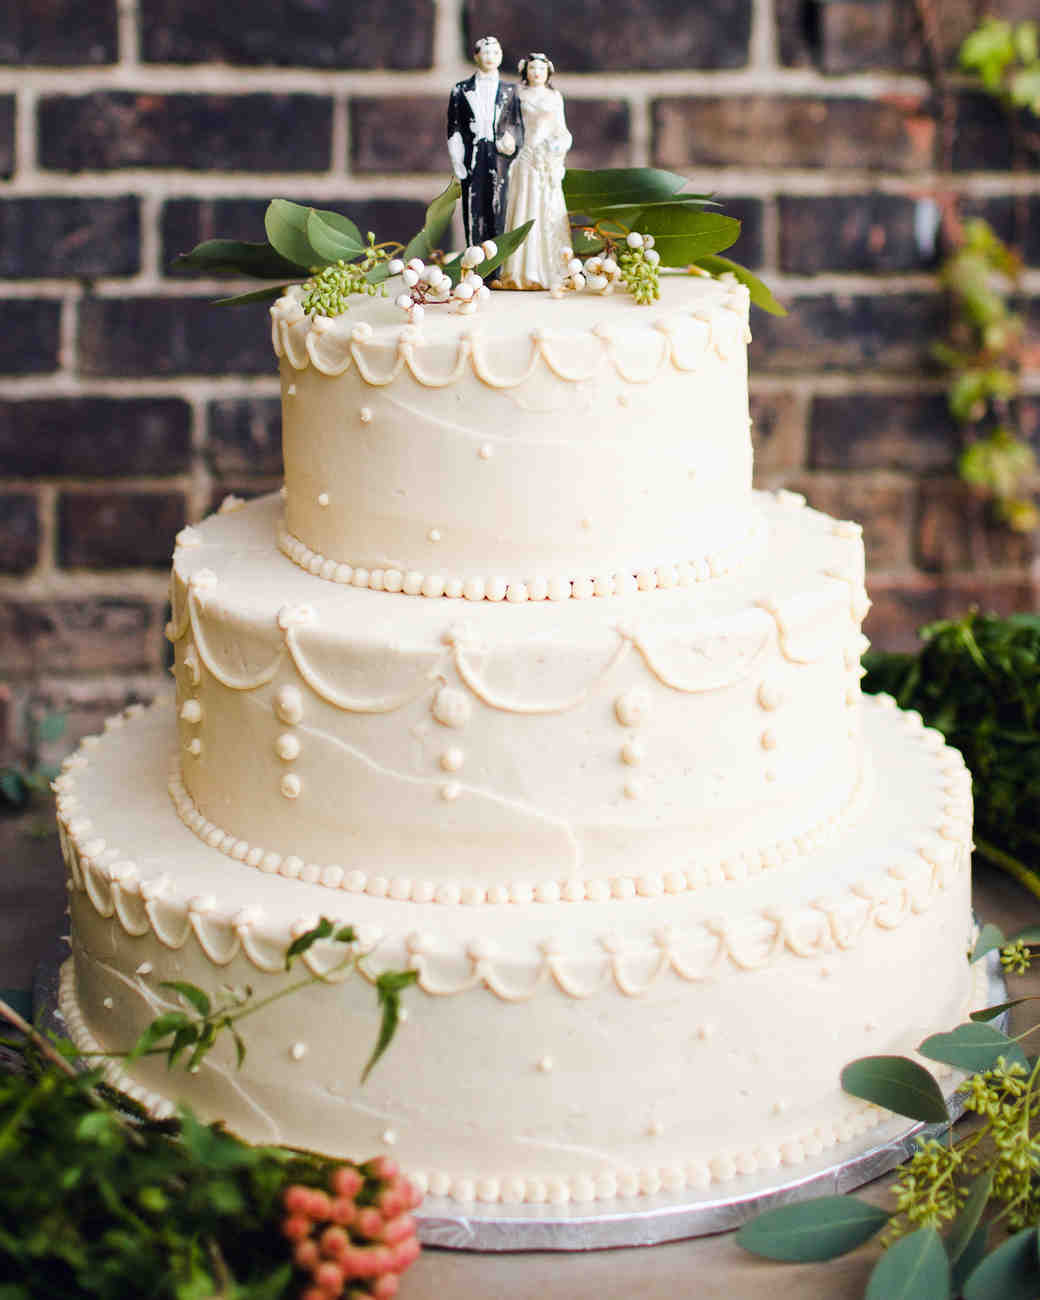 Dig into the best wedding cakes of all time!